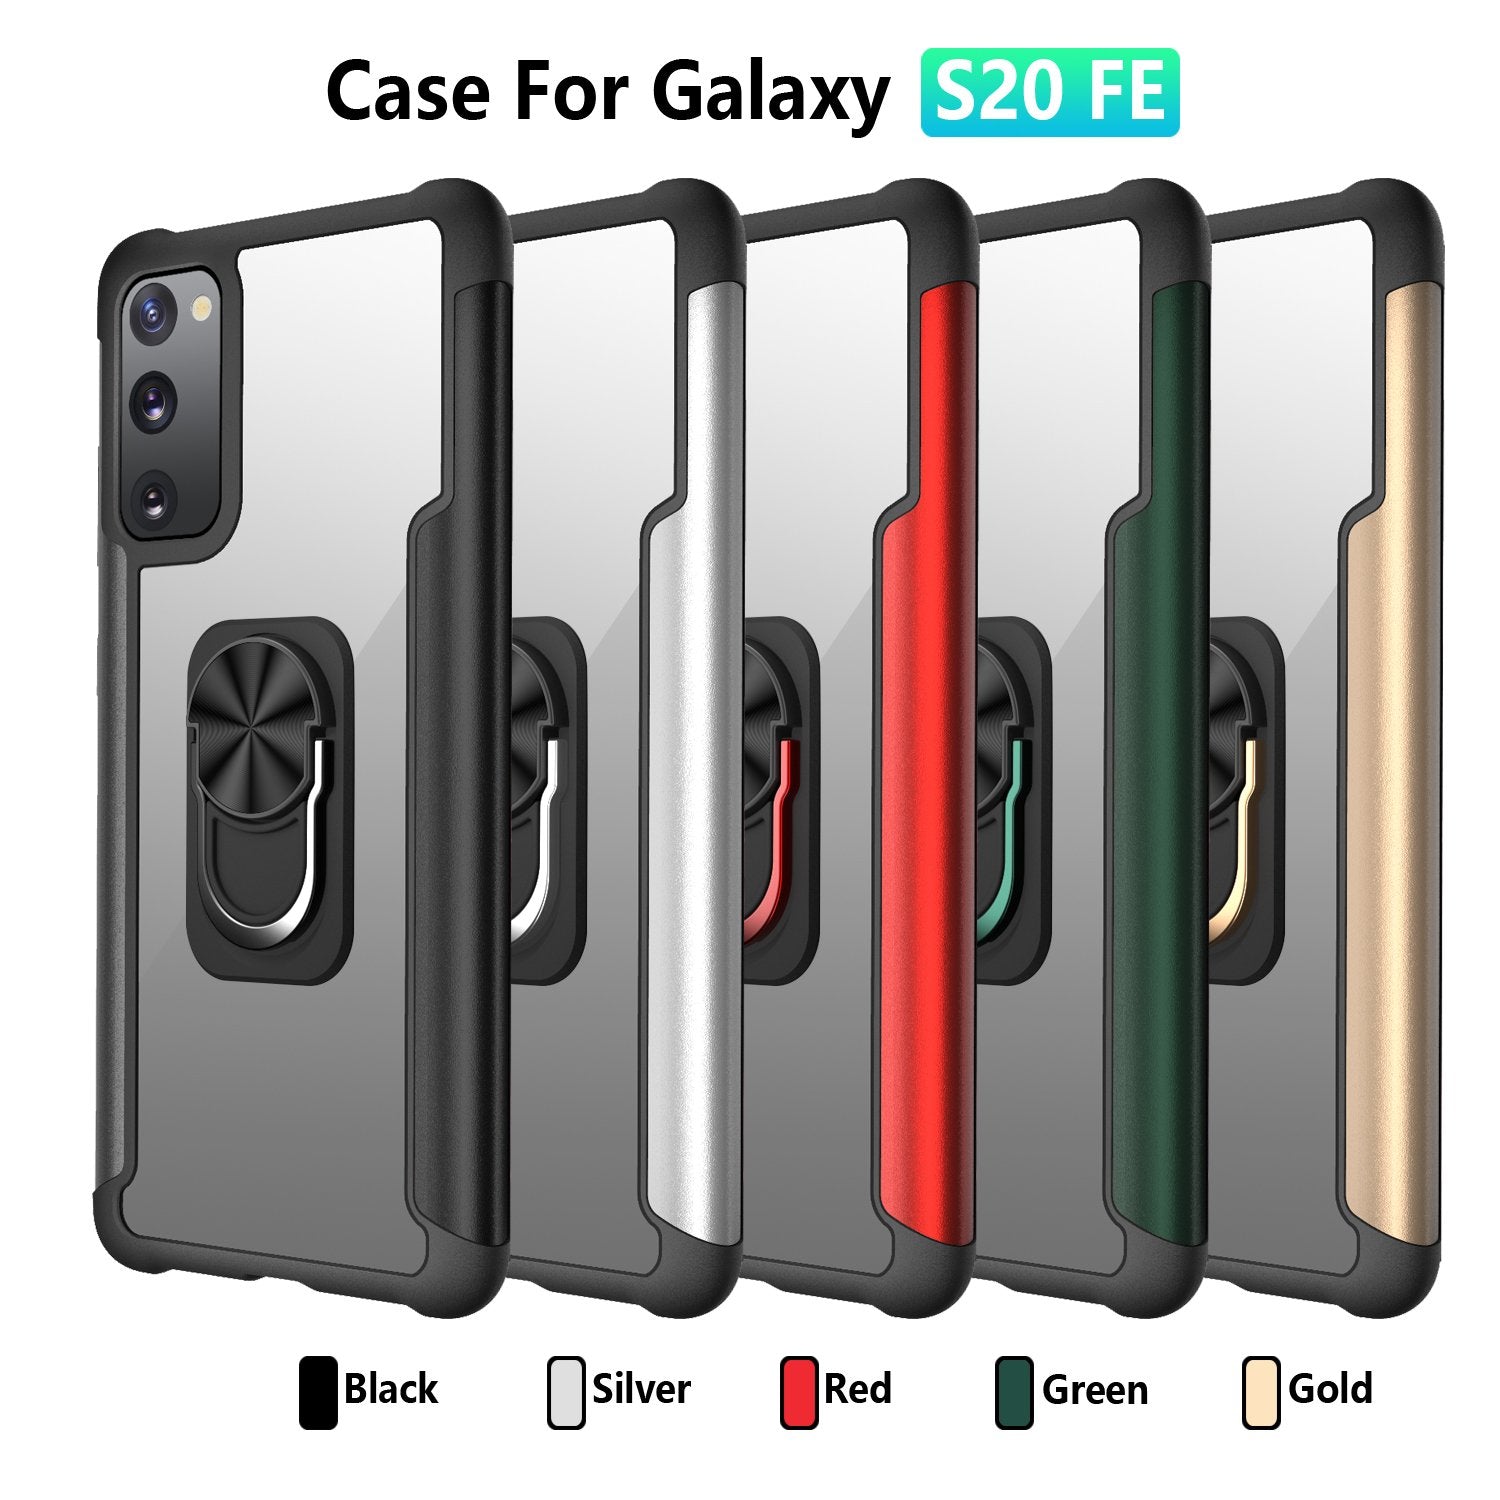 Caeouts Ring Case for Galaxy S20/S20 Plus/S20 Ultra/S20 FE